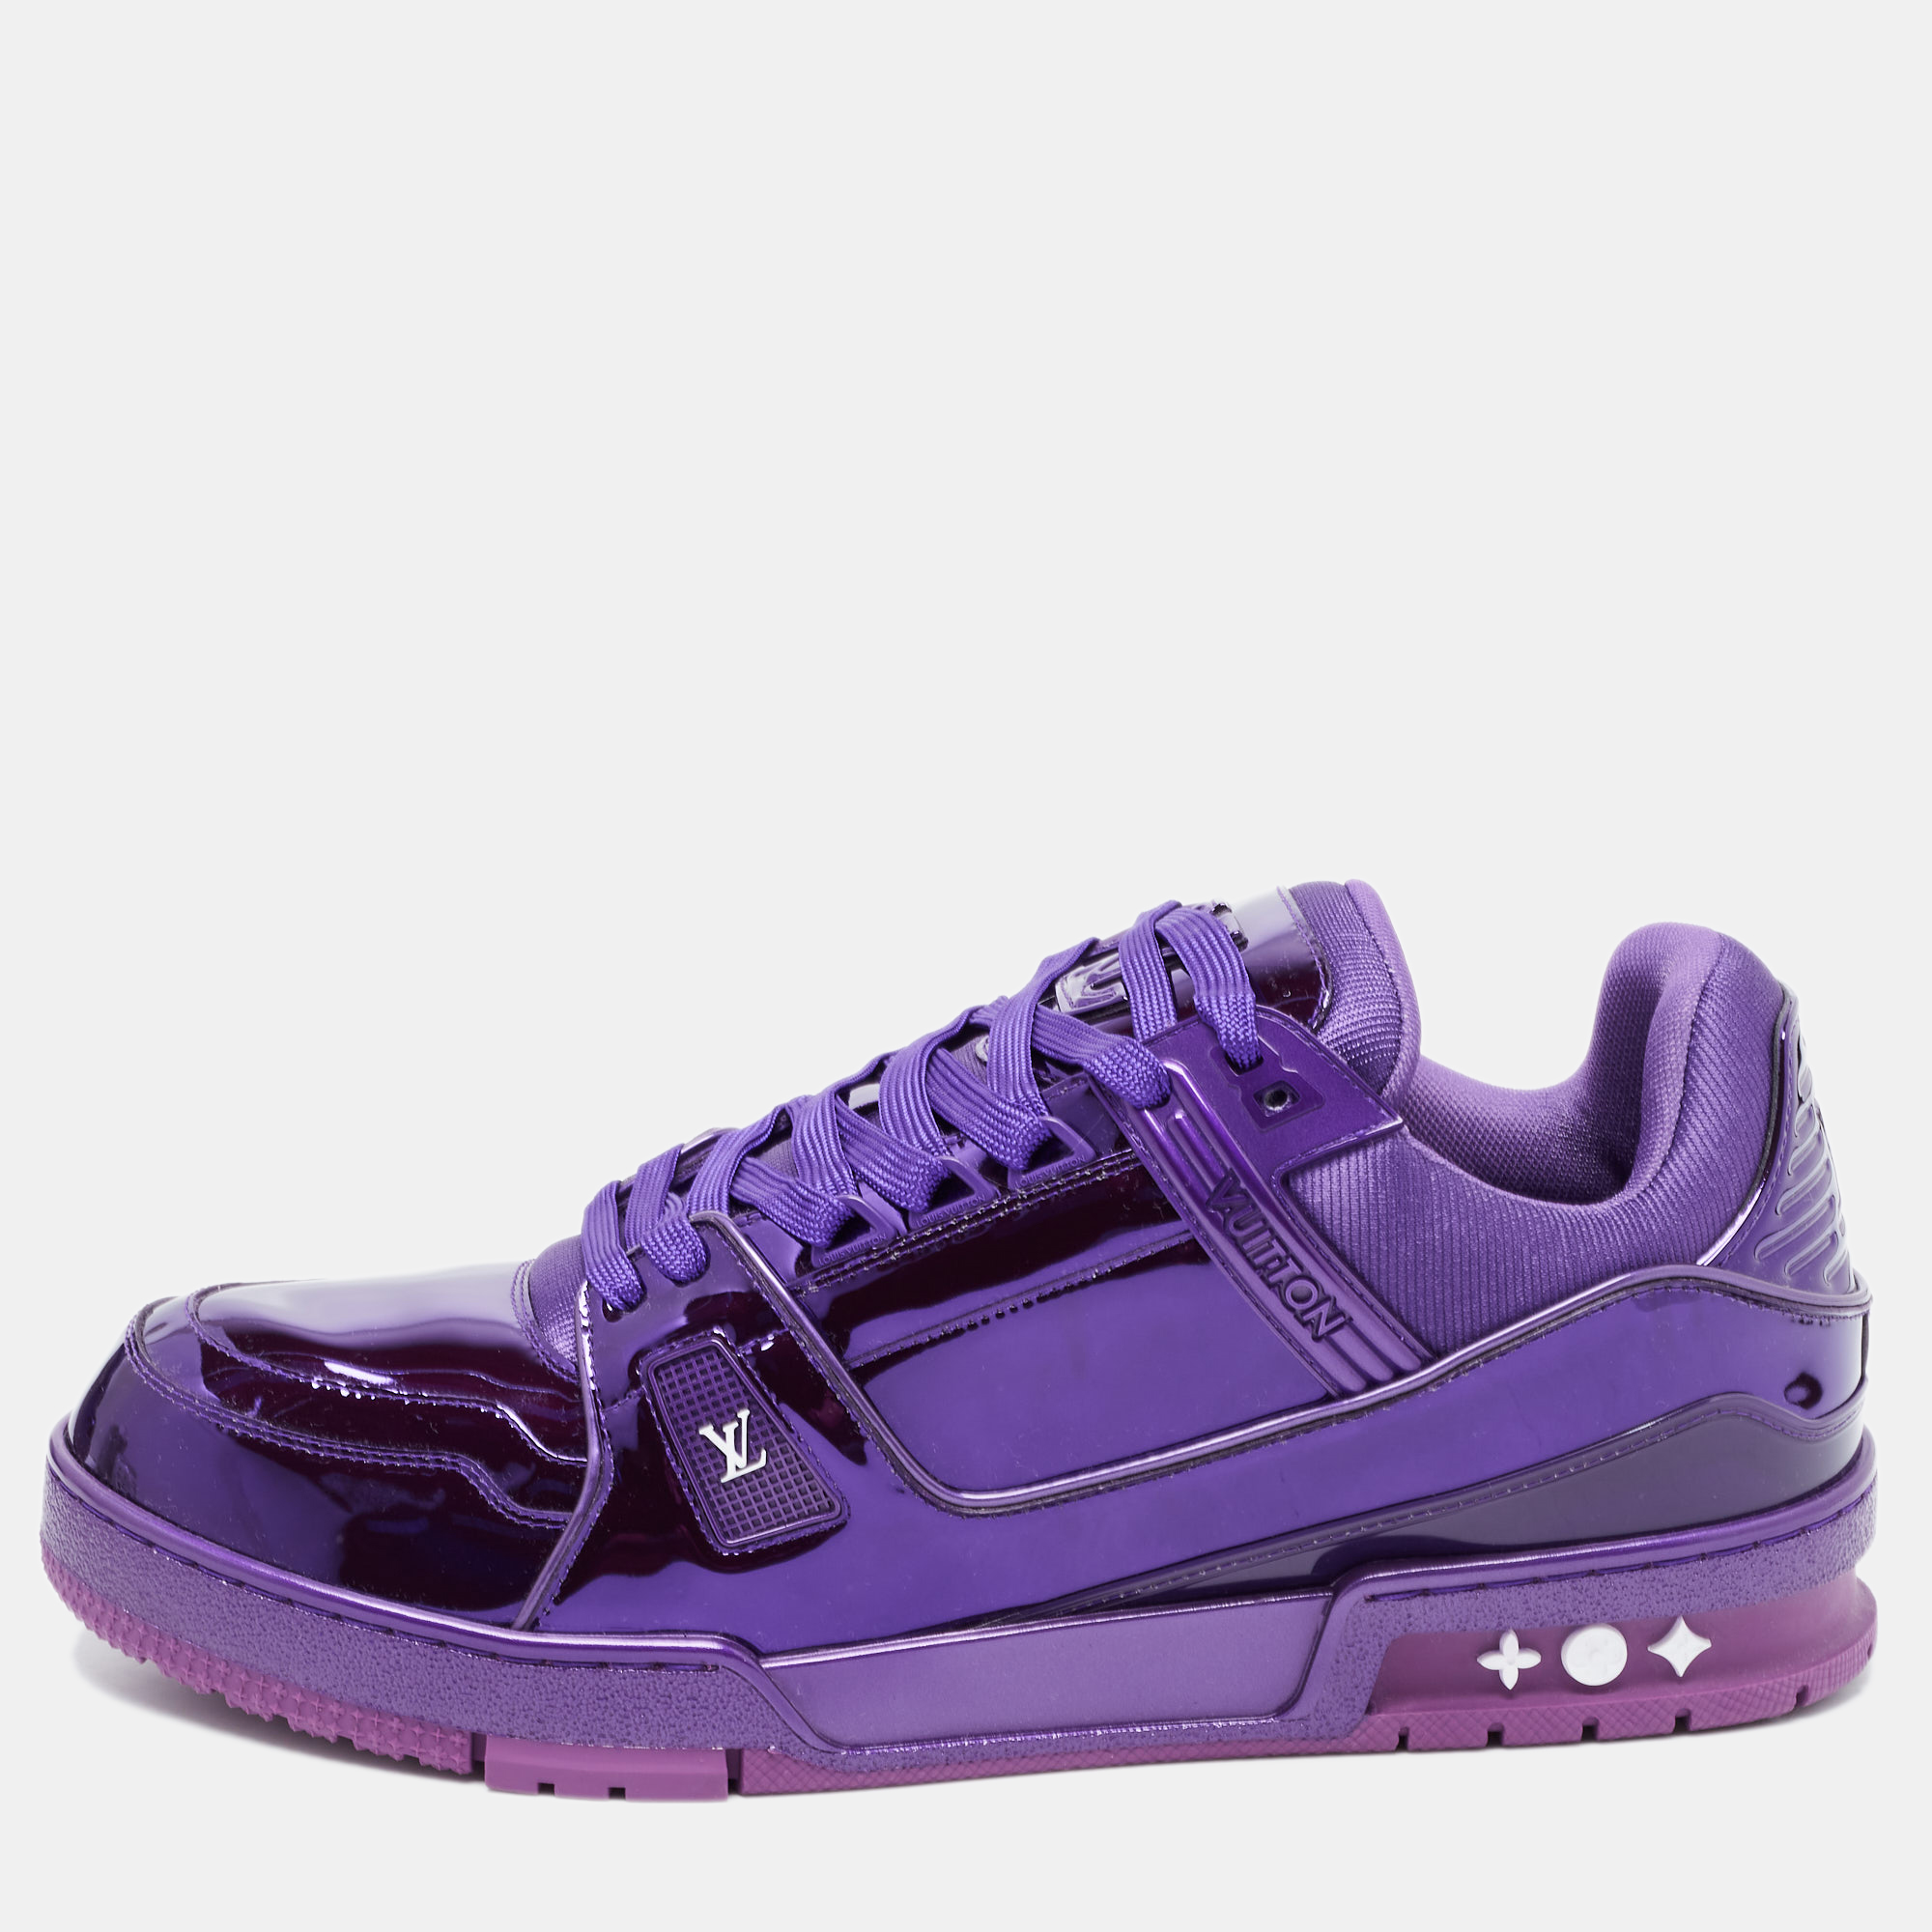 Lv trainer patent leather low trainers Louis Vuitton Purple size